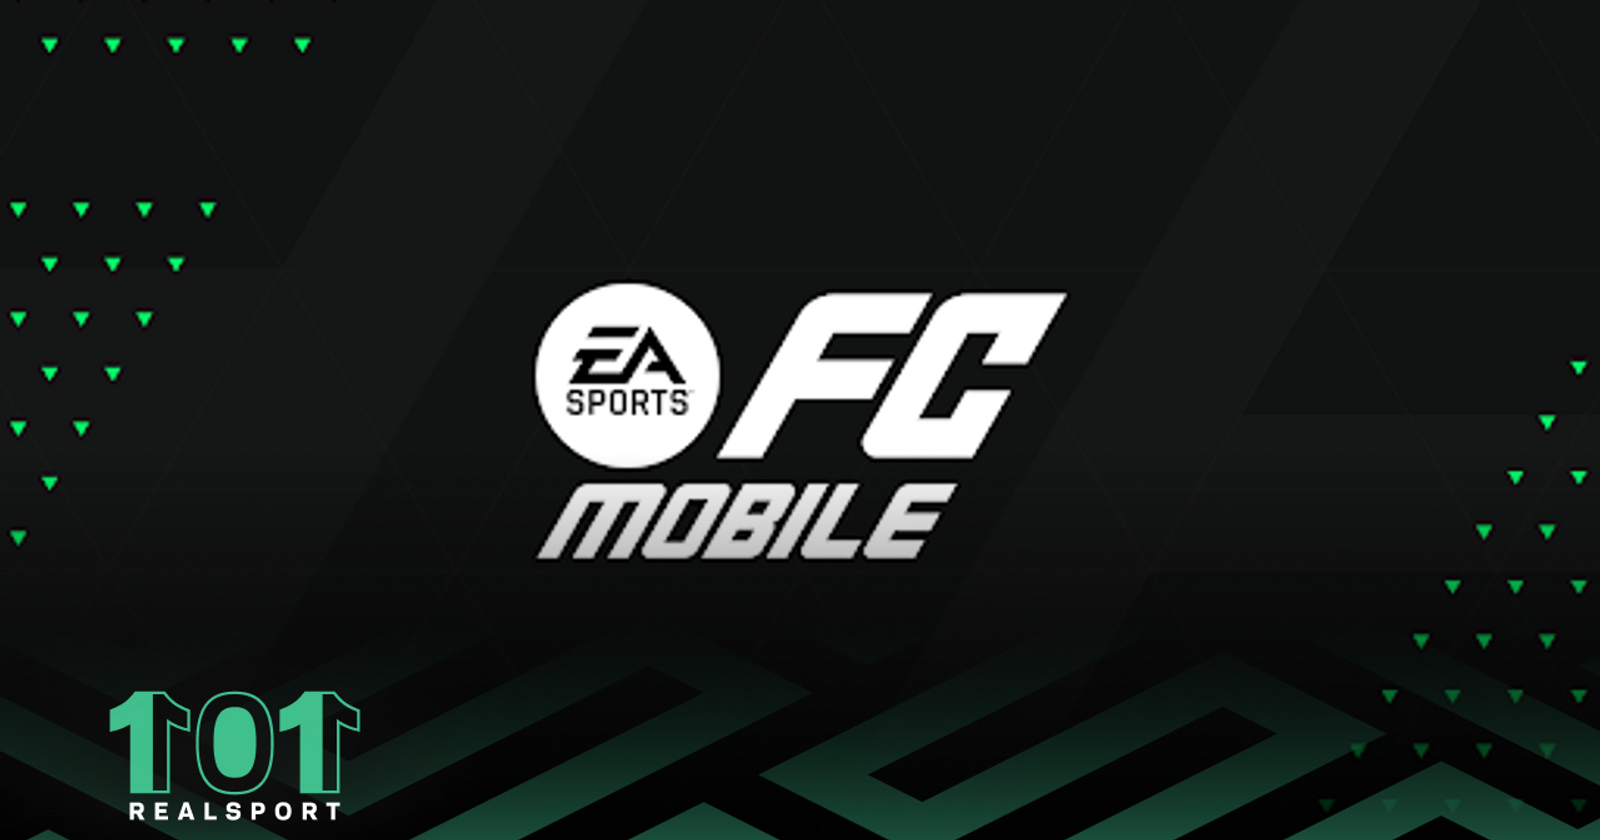 EA SPORTS FC Mobile - Two dominant defenders of their era